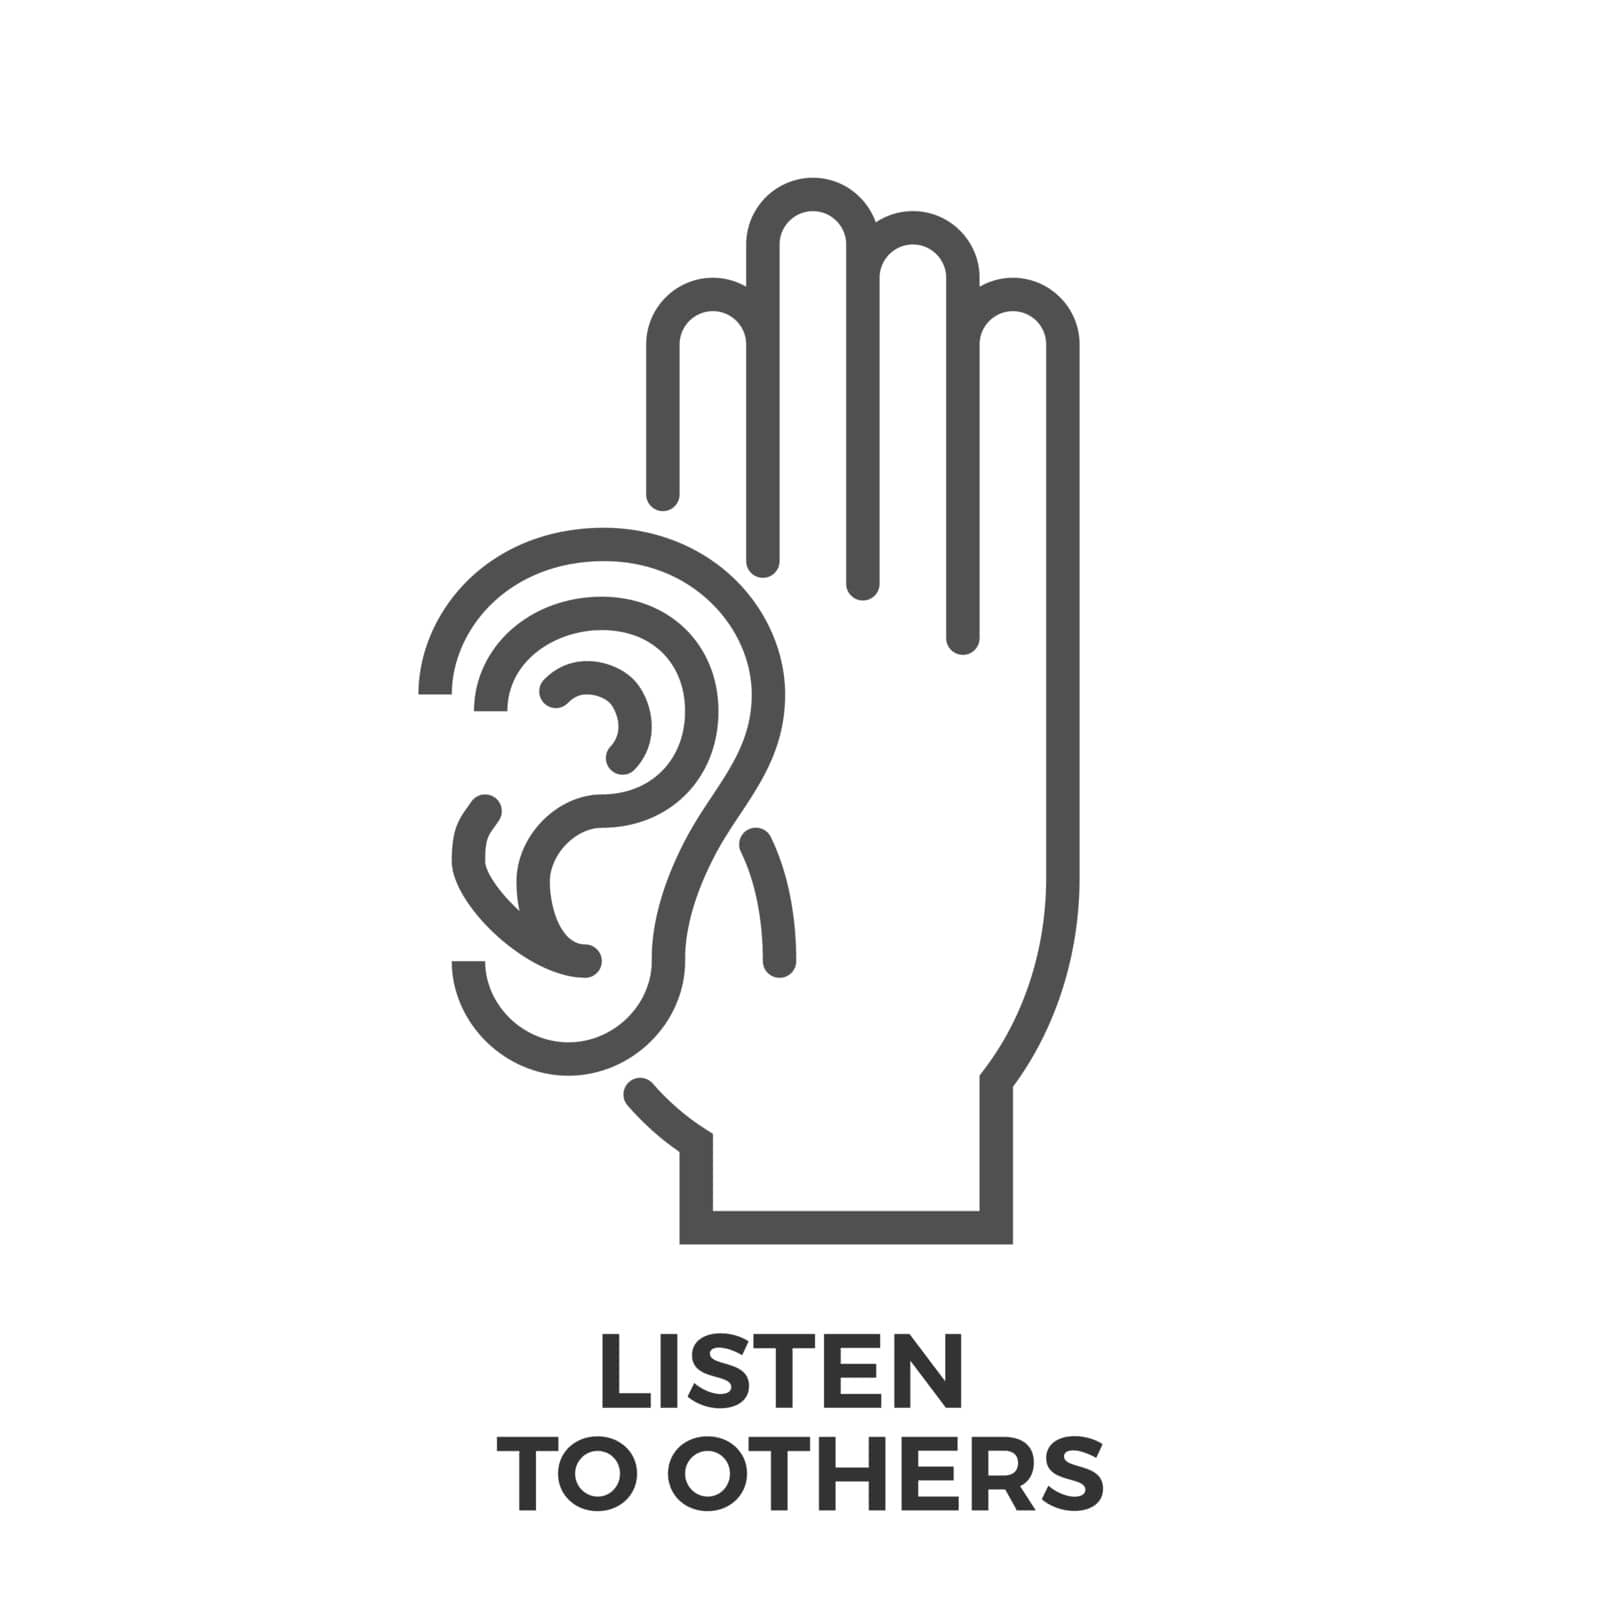 Listen to Others Thin Line Vector Icon Isolated on the White Background.